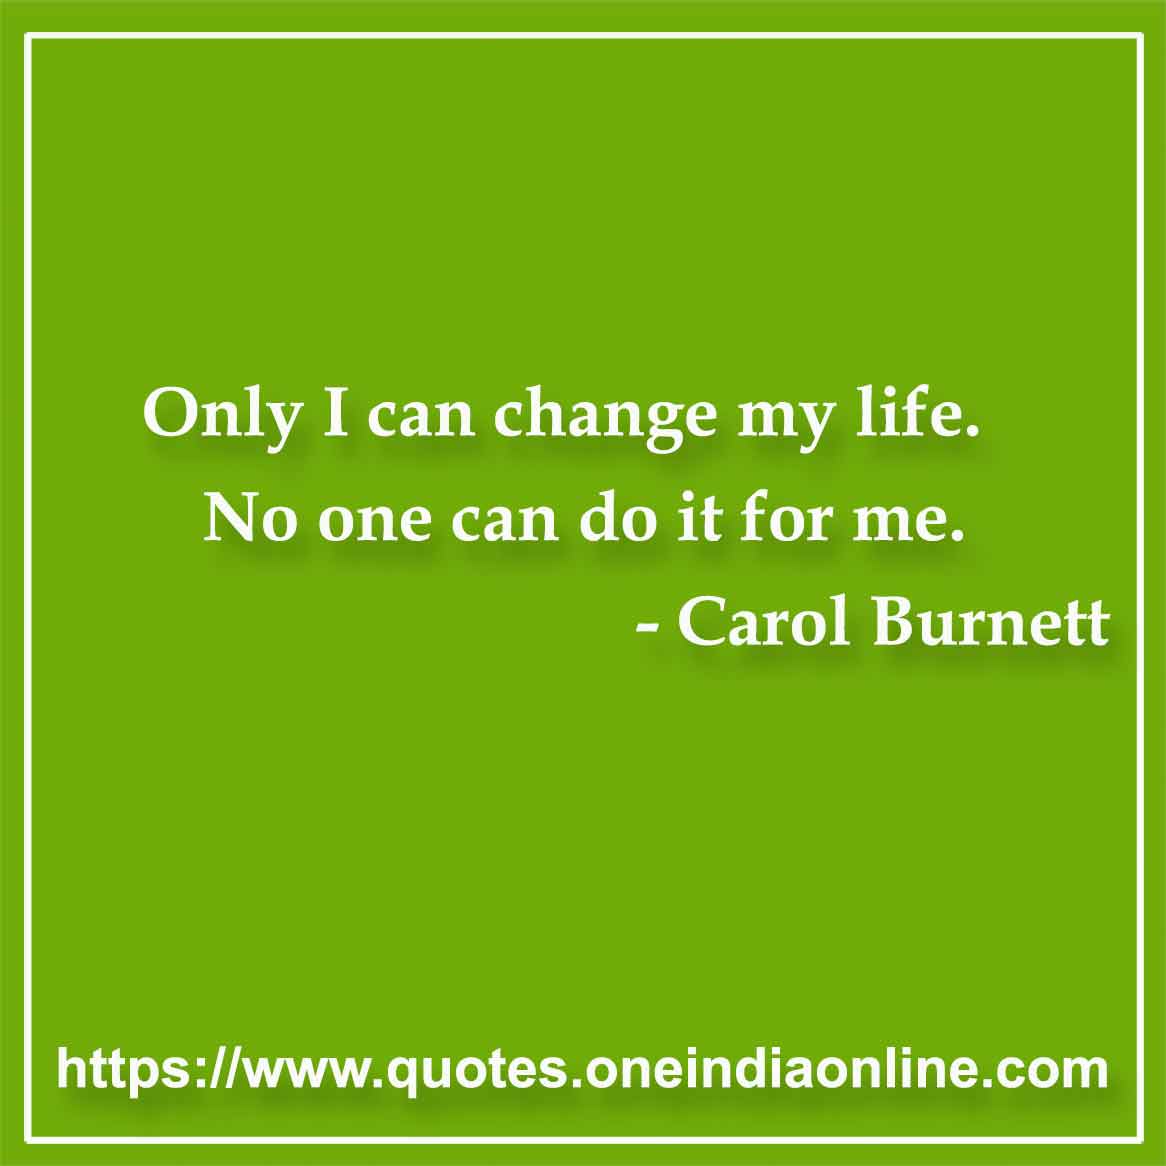 Only I can change my life. No one can do it for me.

-  Carol Burnett